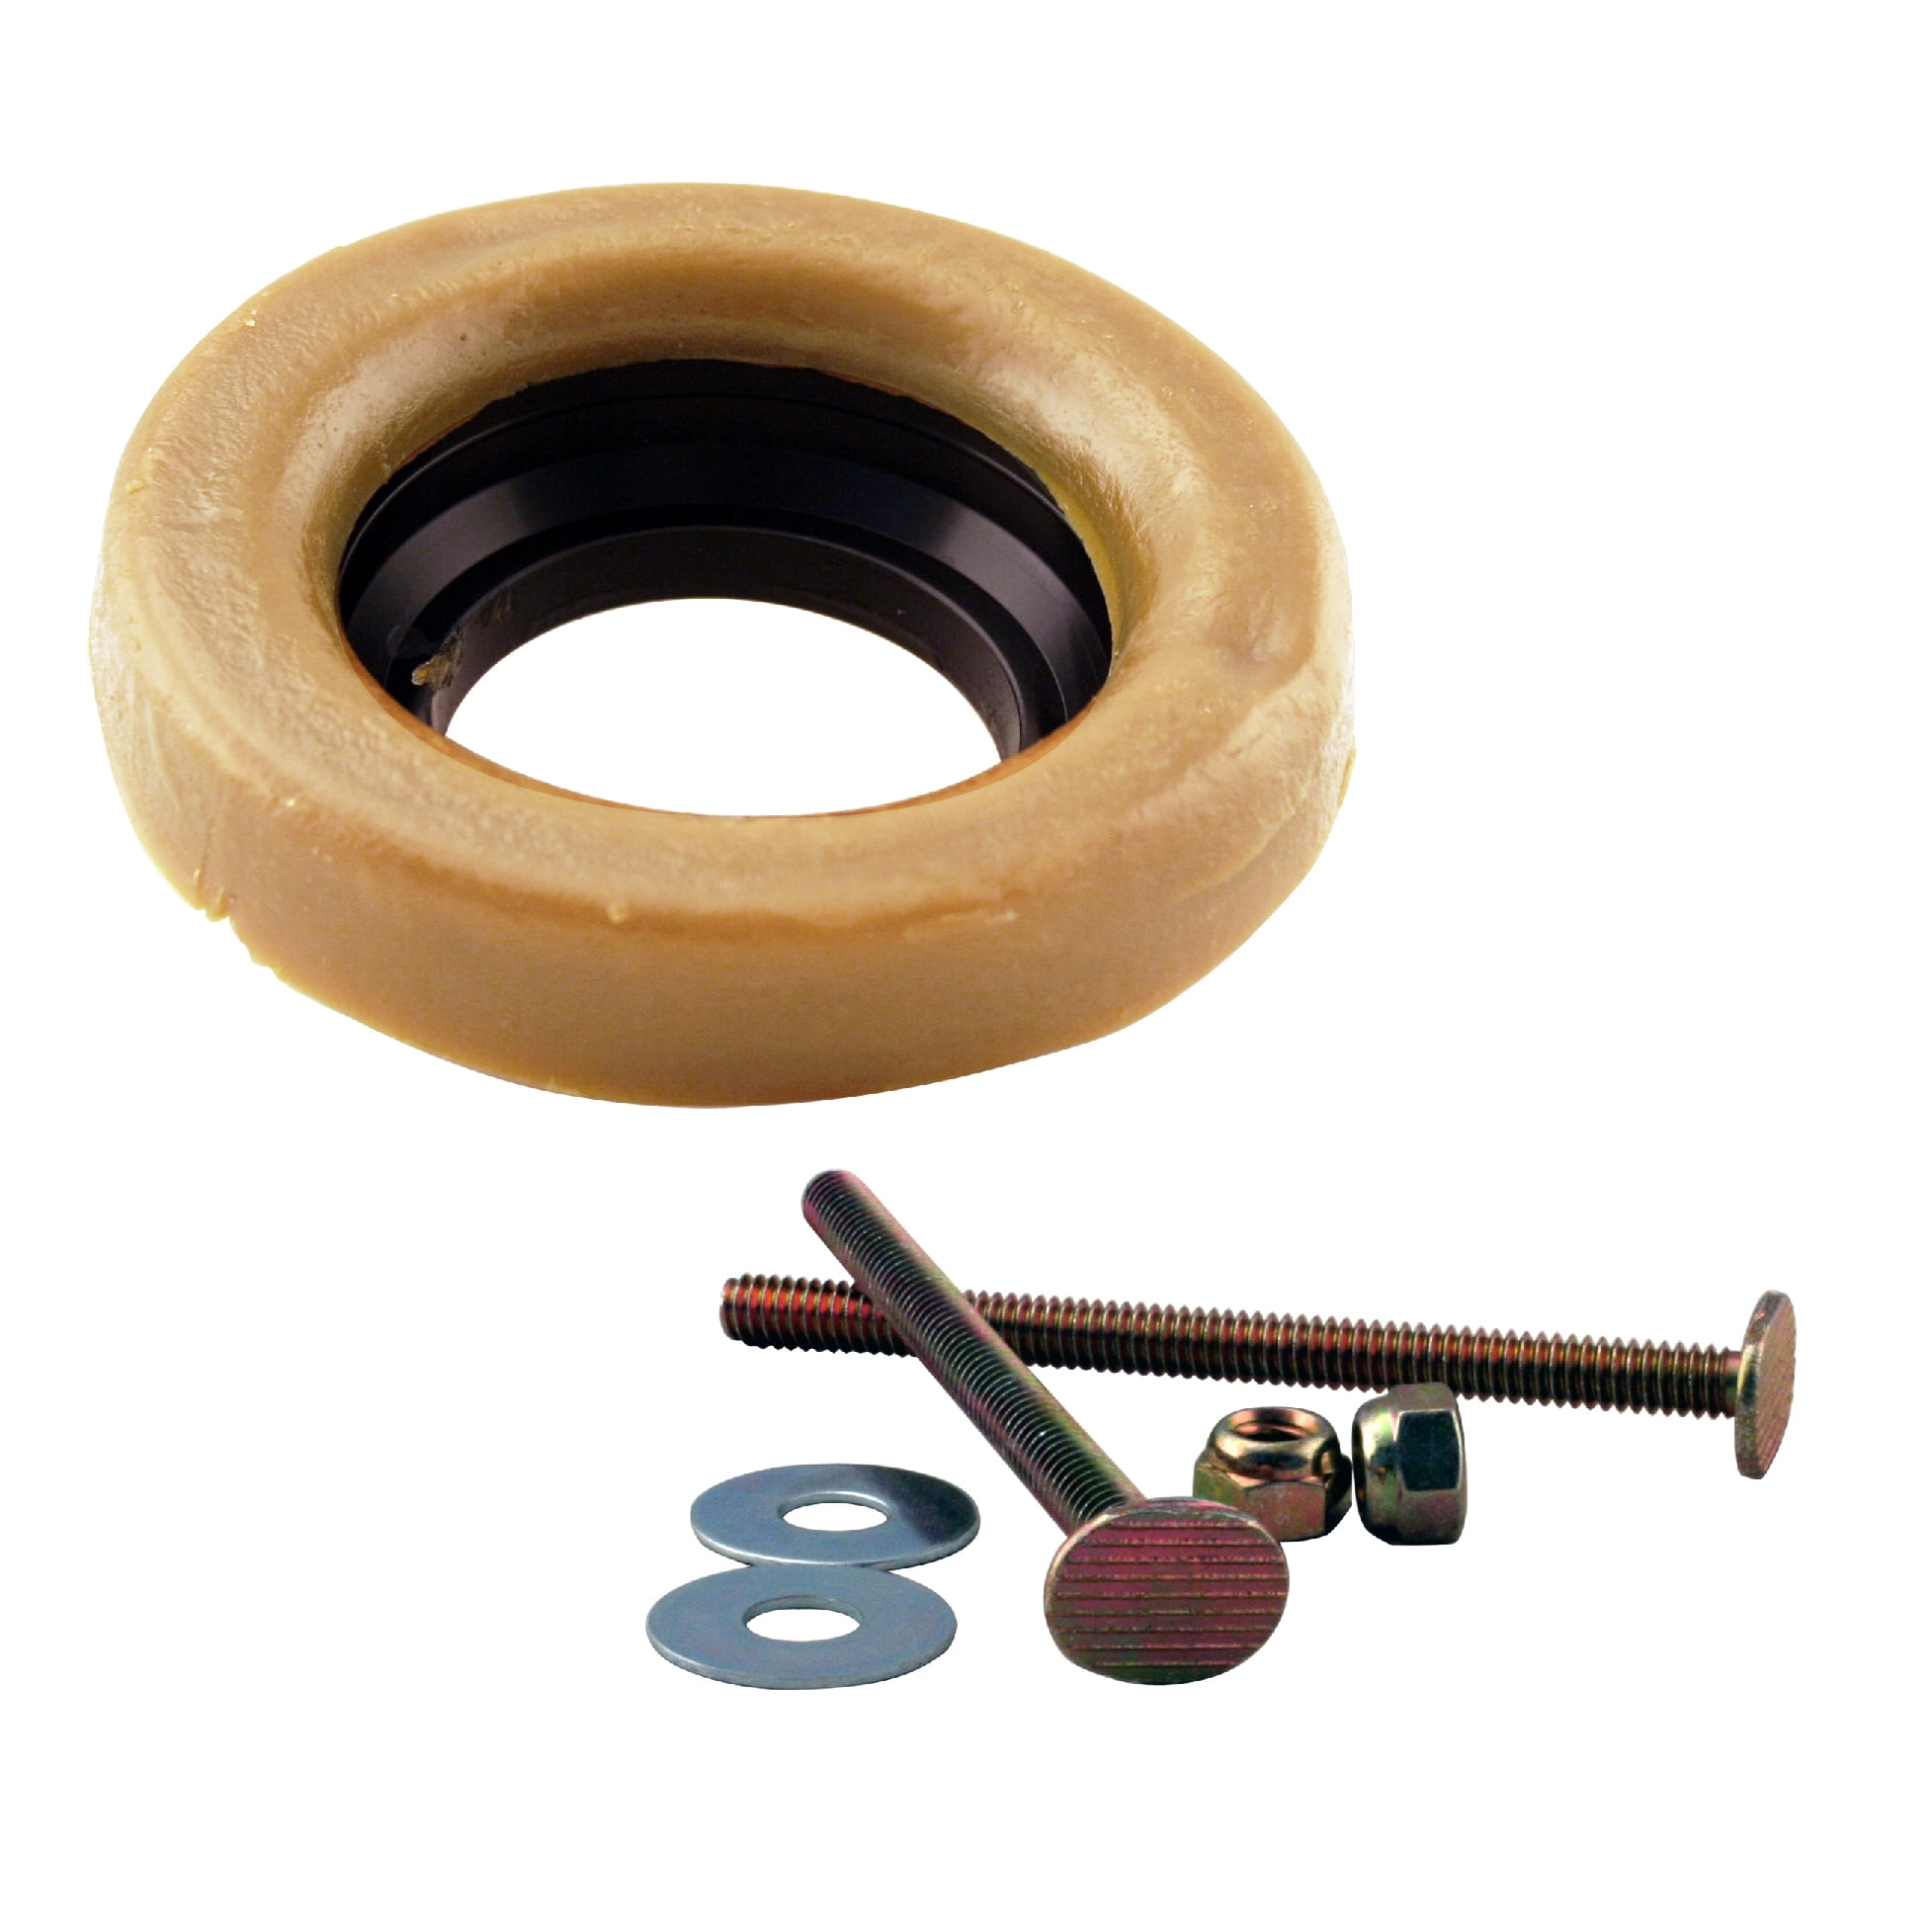 Menty Wax Ring Toilet Kit,includes Flanges and Bolts for reinstalling the  toilet,Fits 3-inch or 4-inch Waste Lines(2 PCS)(Thin+Thick